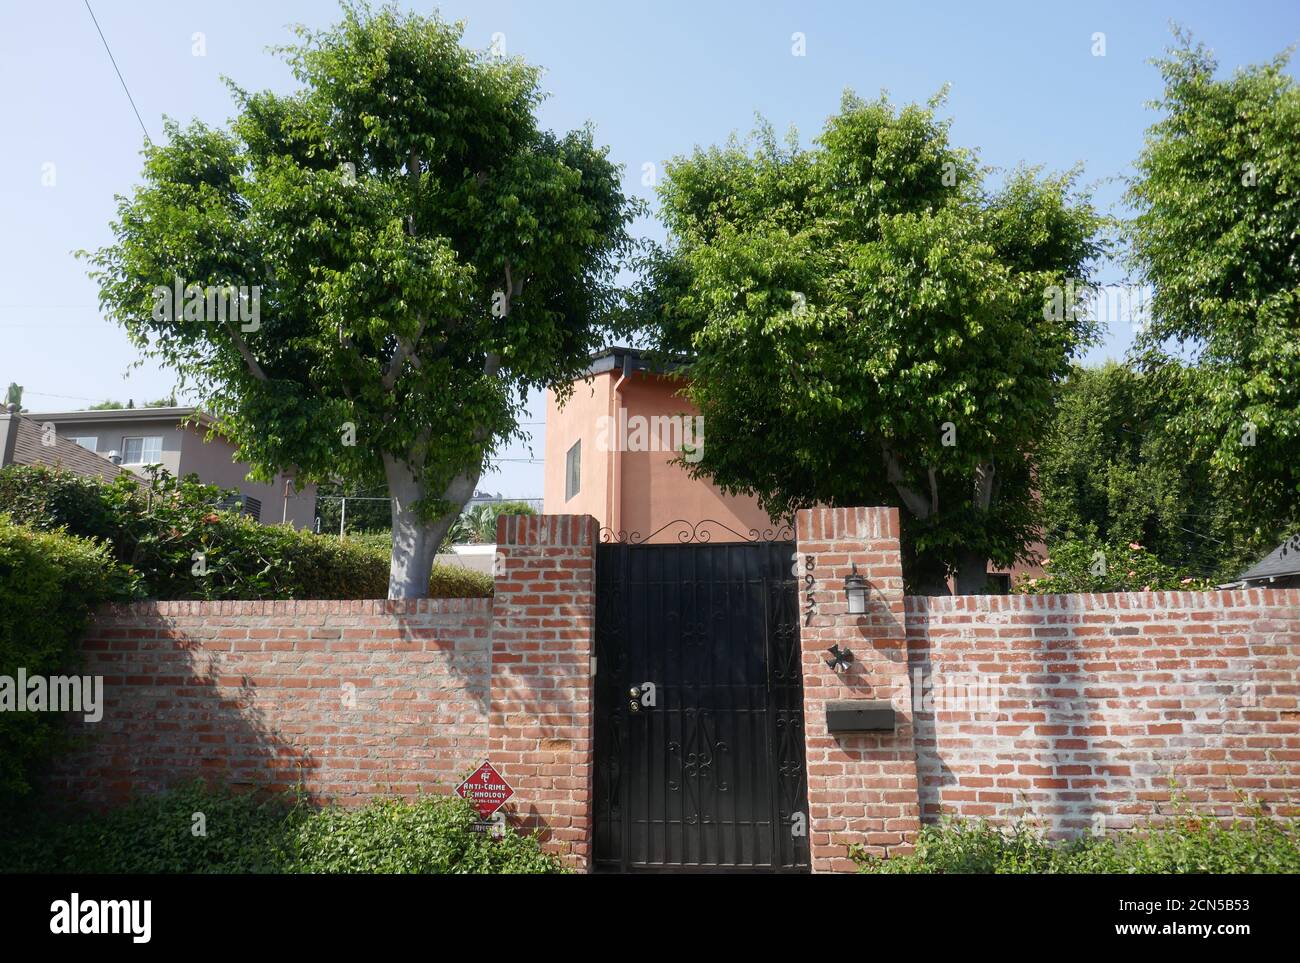 West Hollywood, California, USA 17th September 2020 A general view of atmosphere of actress Linda Hamilton, actress Jennifer Jason Leigh, actress Glynnis O'Connor's former home at 8955 Norma Place in West Hollywood, California, USA. Photo by Barry King/Alamy Stock Photo Stock Photo